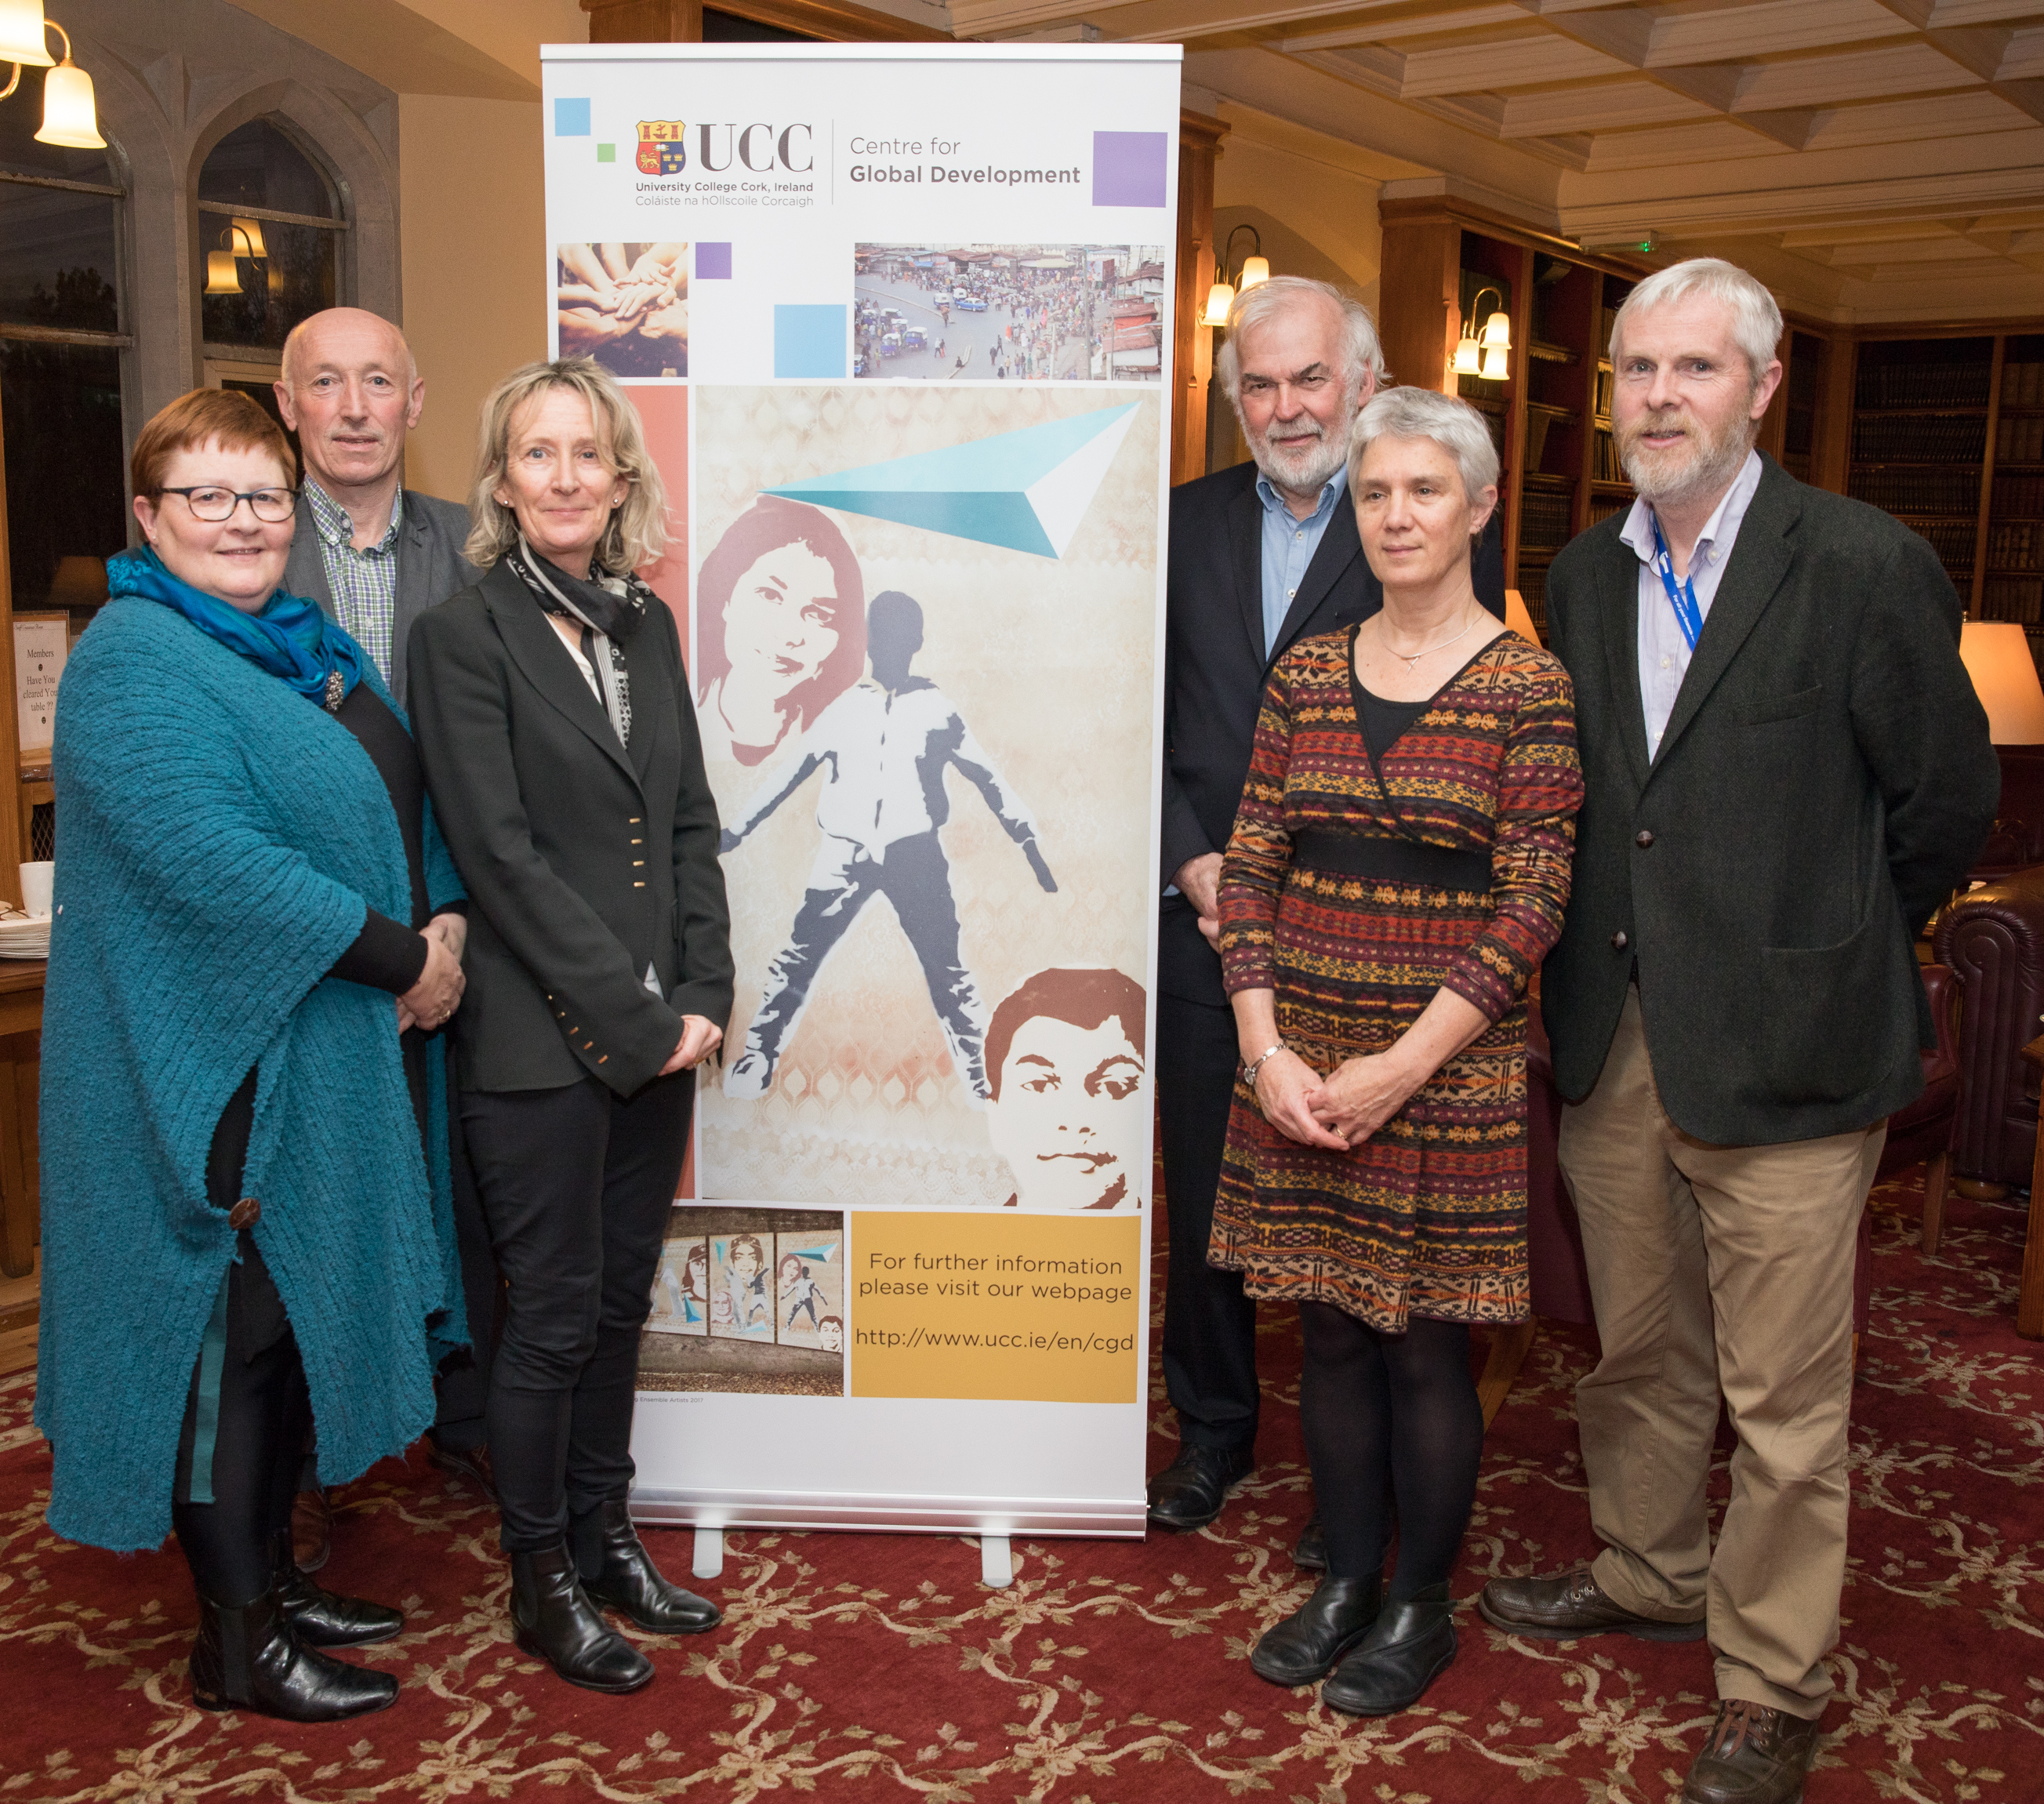 UCC marks enhanced engagement on global issues through its Centre for Global Development